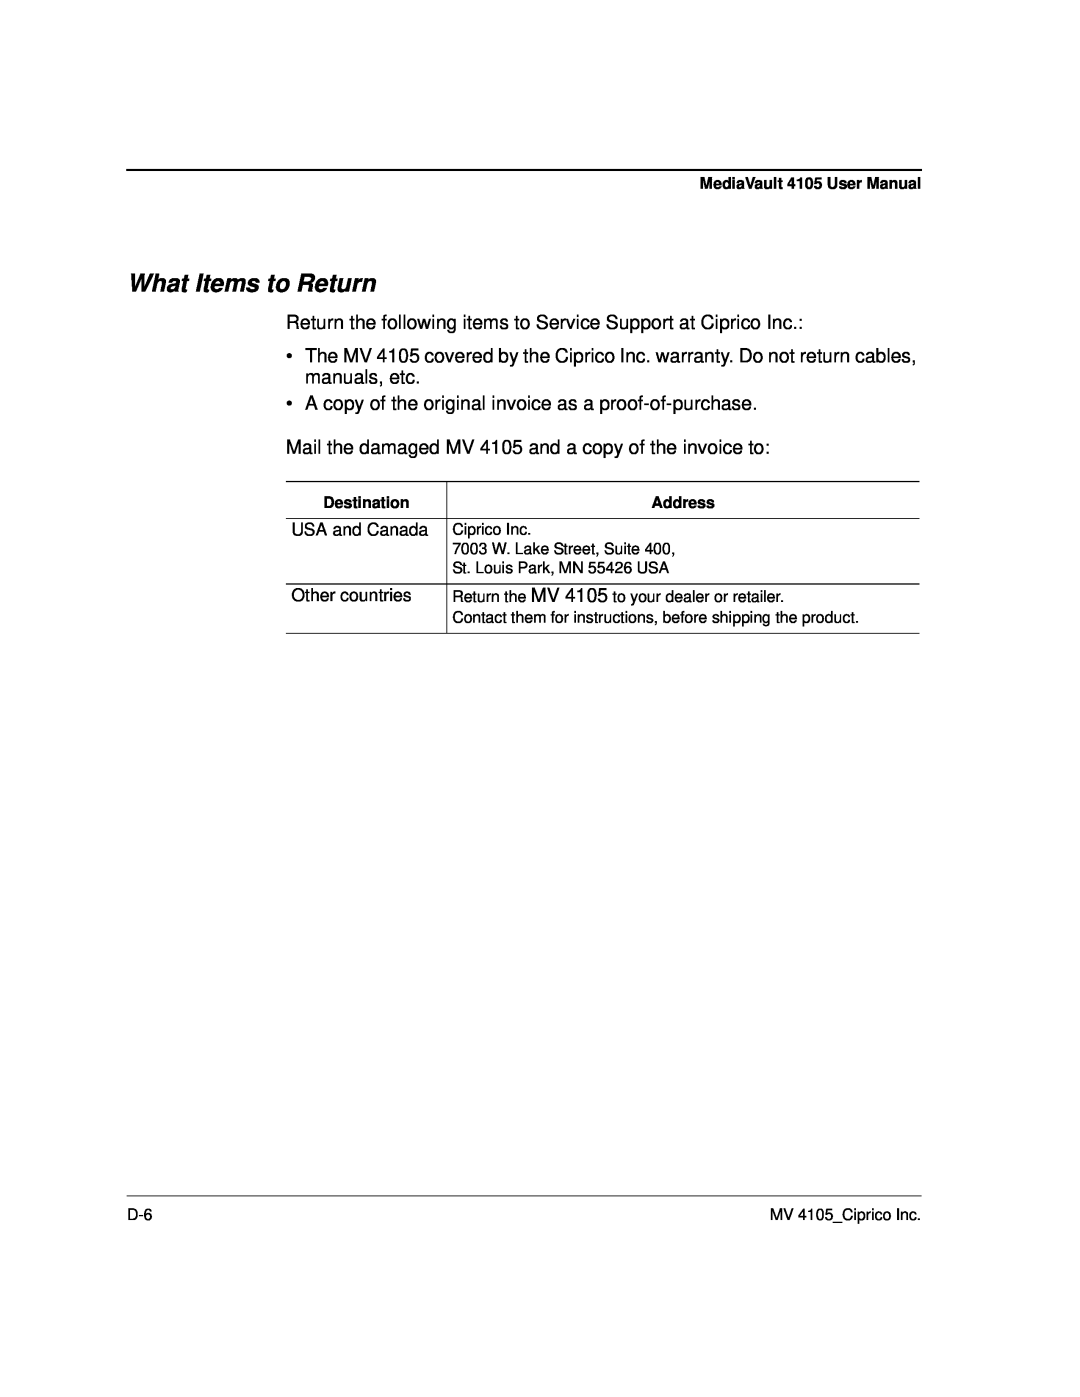 Ciprico 4105 Series user manual What Items to Return 